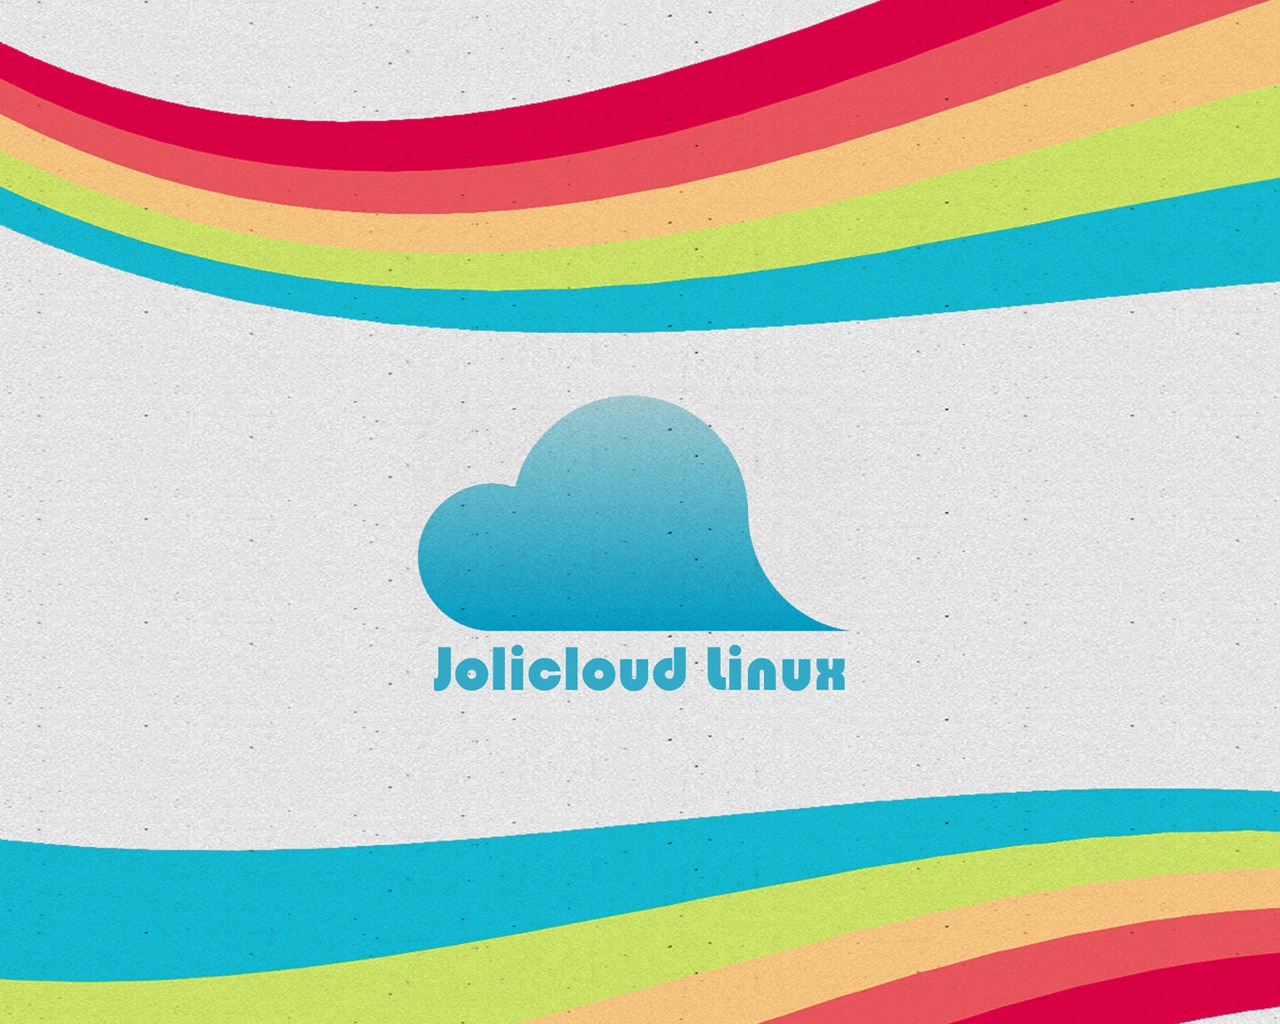 Jolicloud Linux for 1280 x 1024 resolution